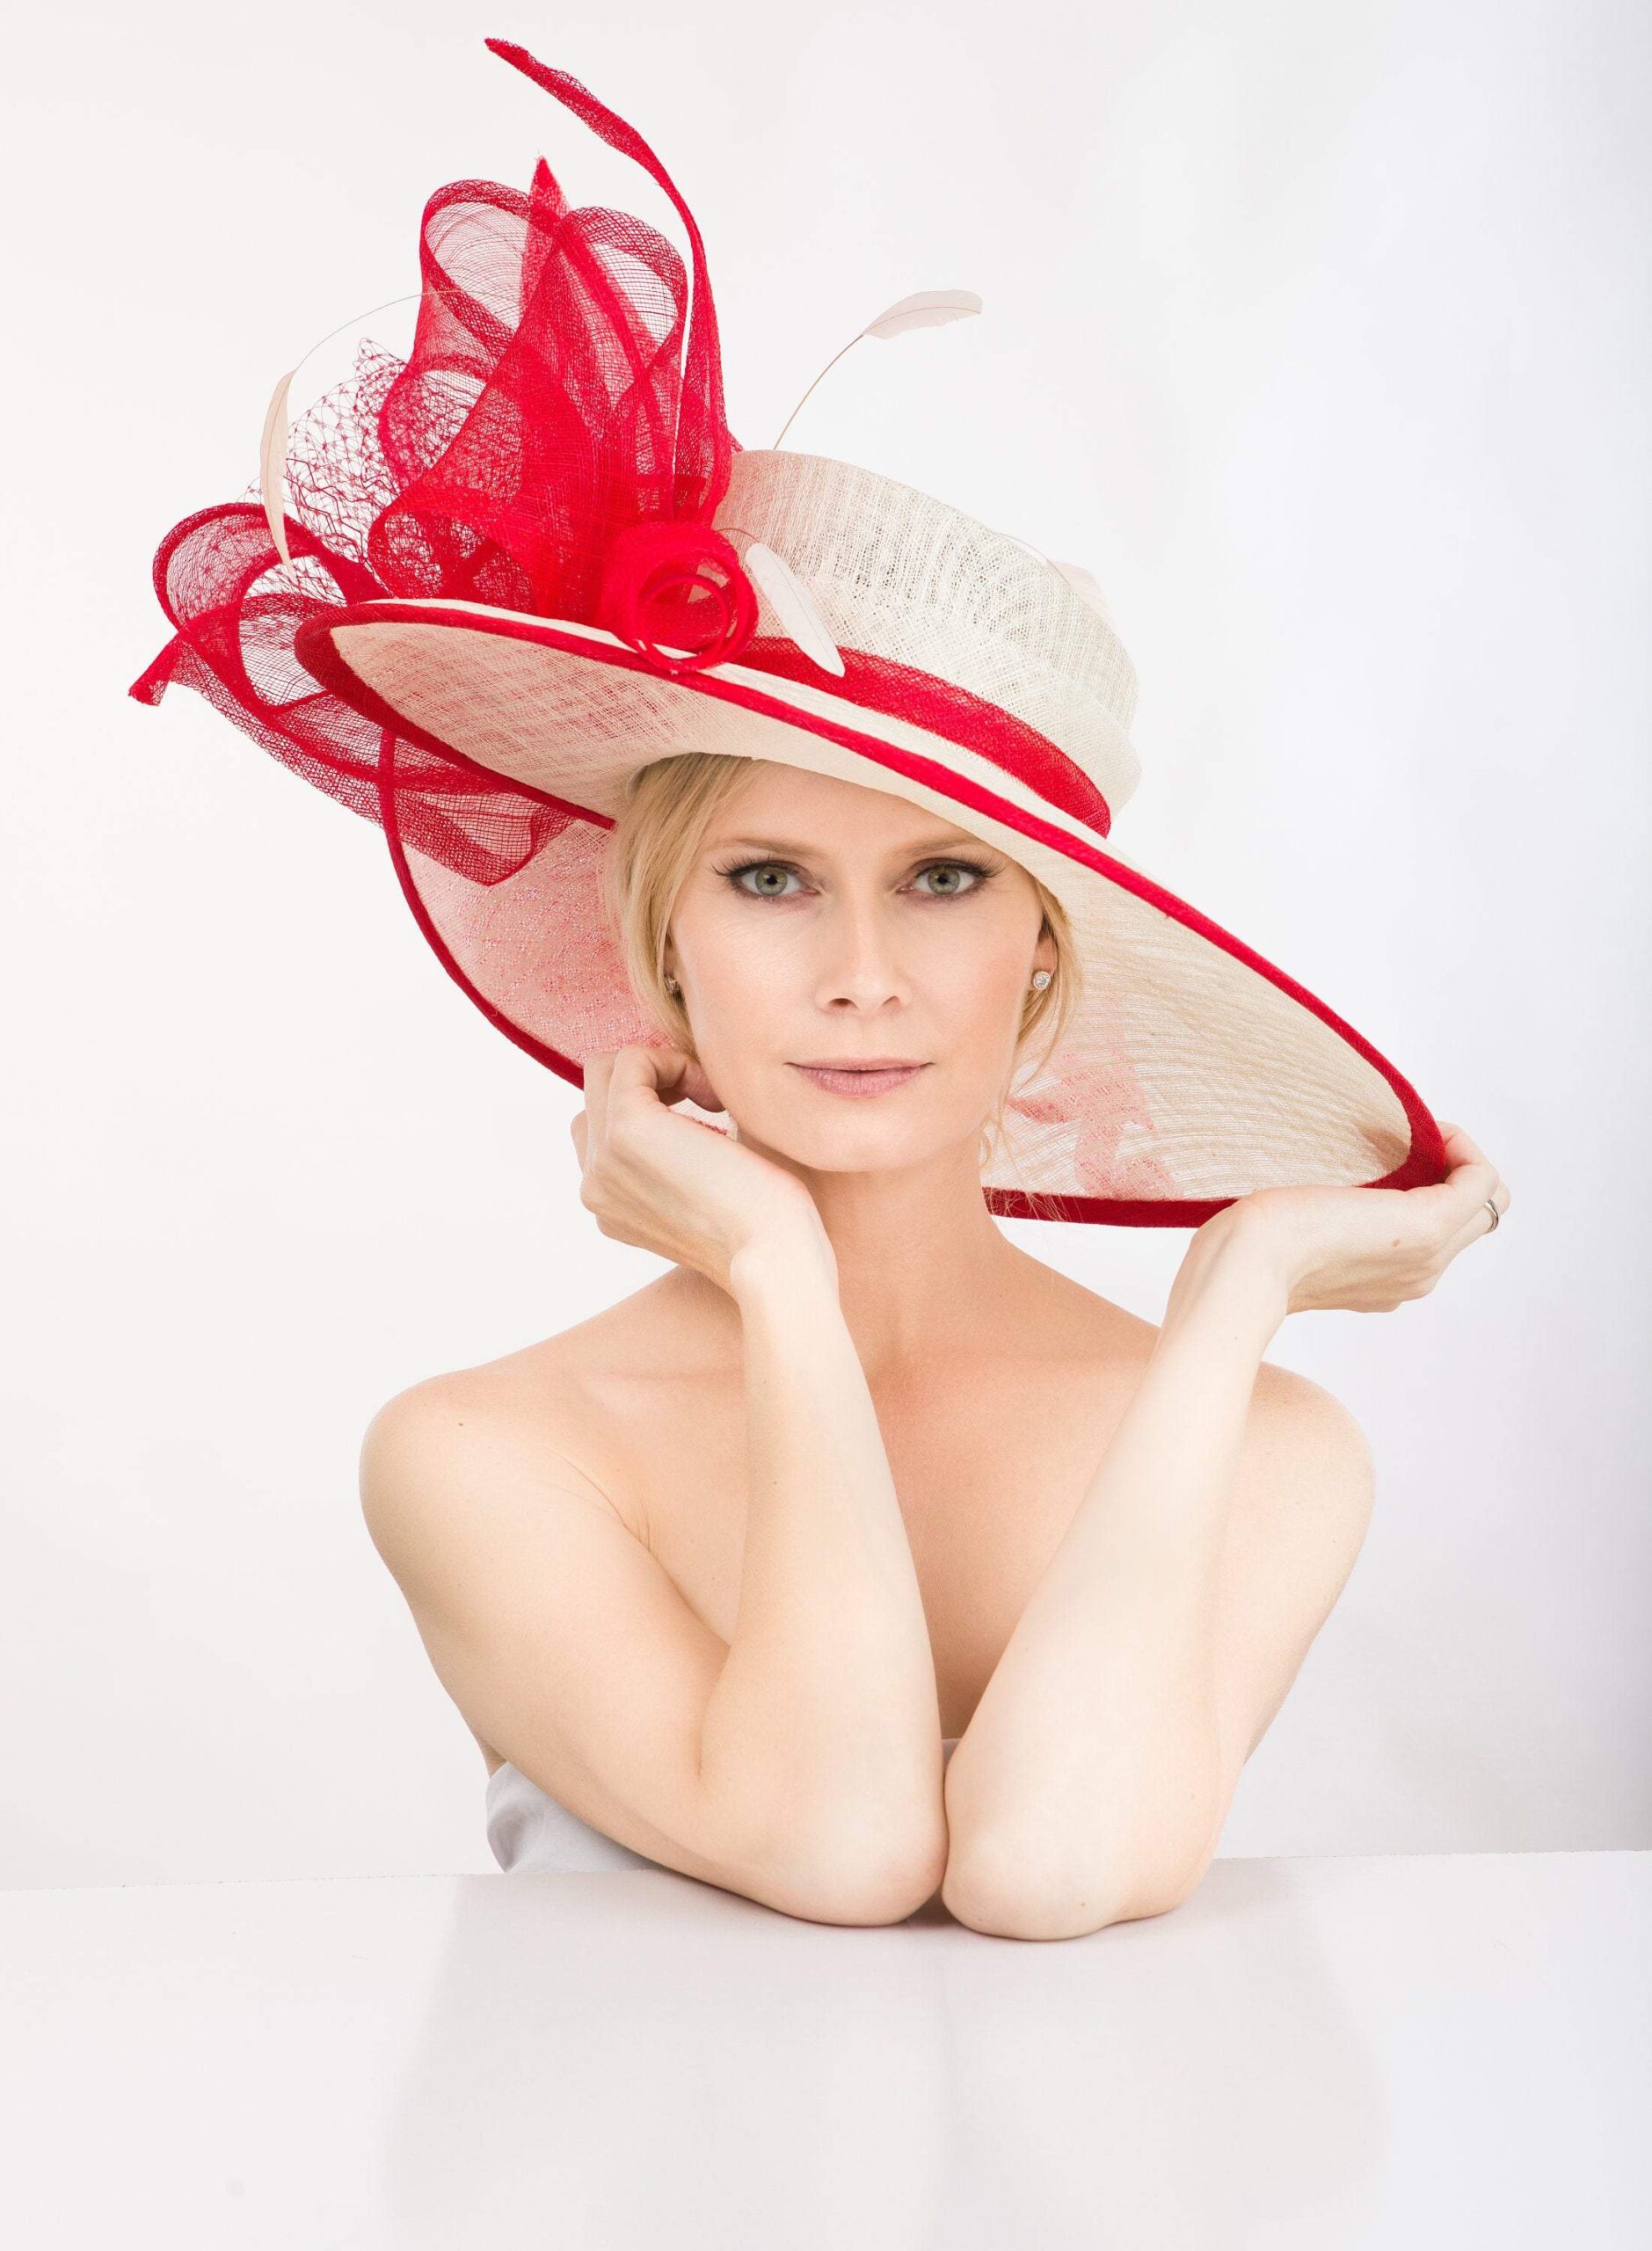 2018 collection. Kentucky Derby red hat, ivory hat, , Red Derby hat, women hat, Royal Ascot hat, couture fashion hat, formal hat, wedding, r